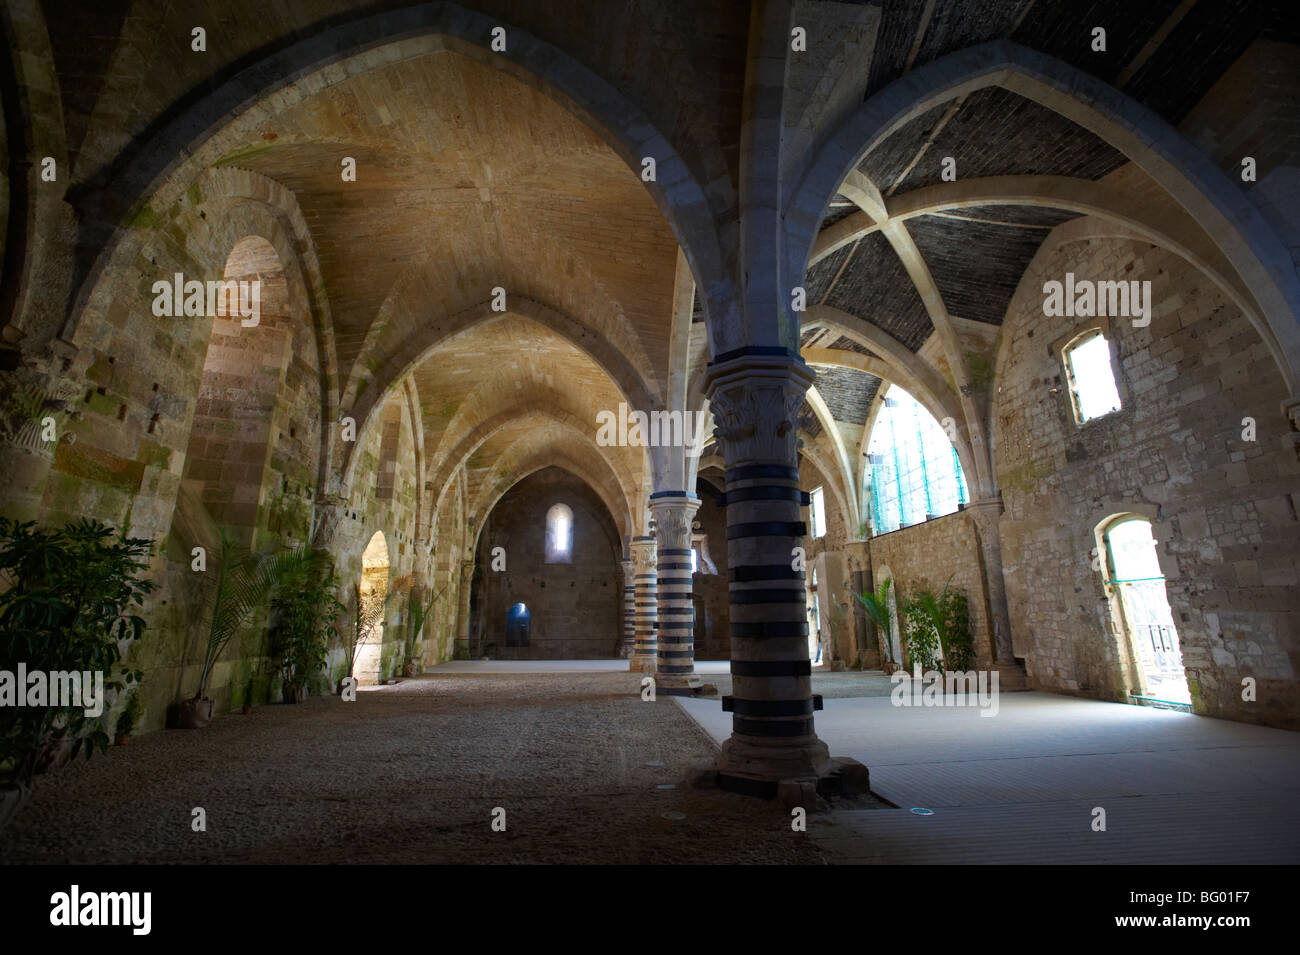 Interior of the Maniace castle, Siracuse, Sicily Stock Photo